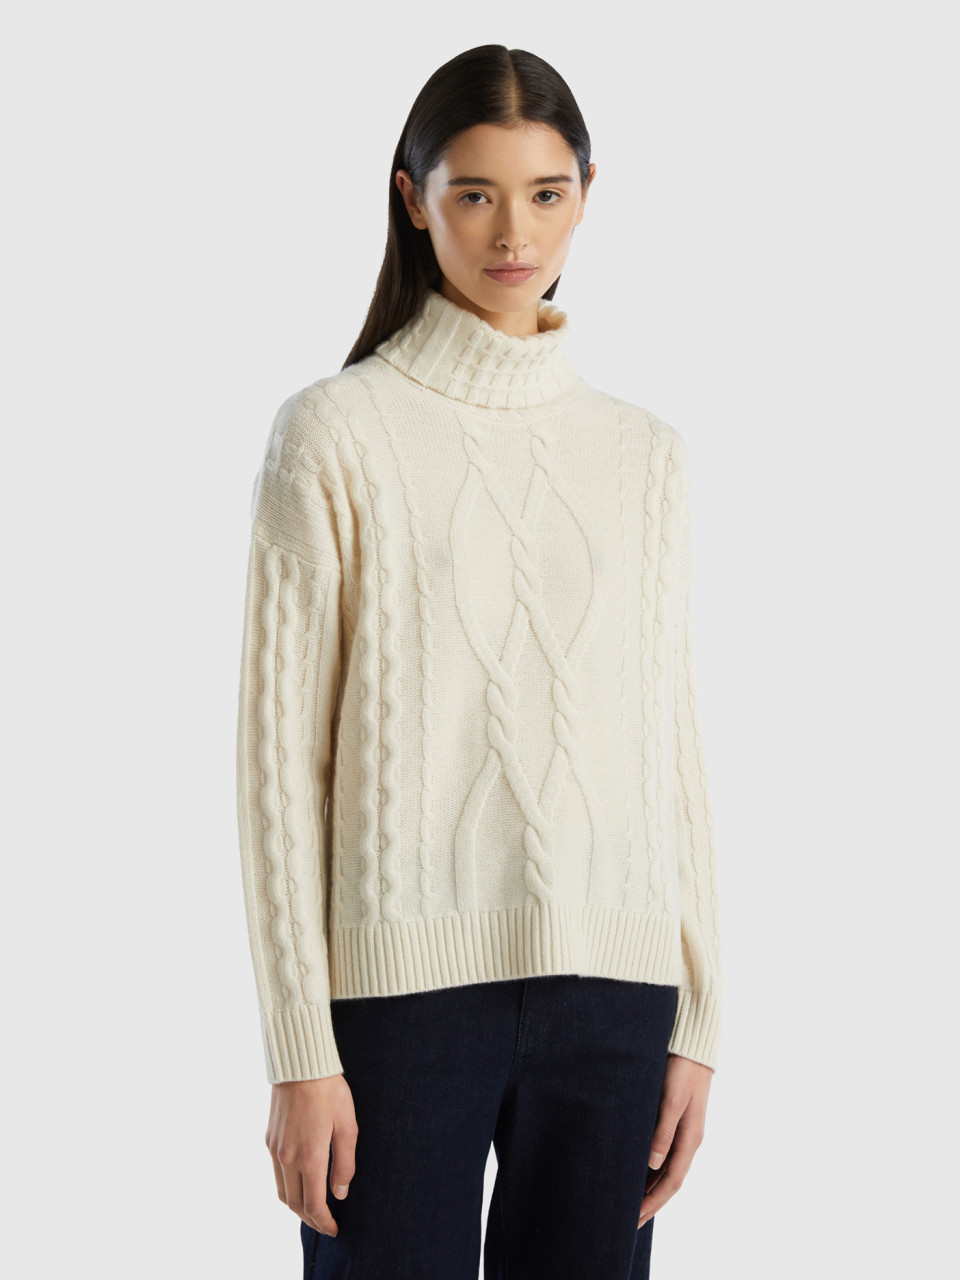 Benetton, Pure Cashmere Turtleneck With Cable Knit, Creamy White, Women